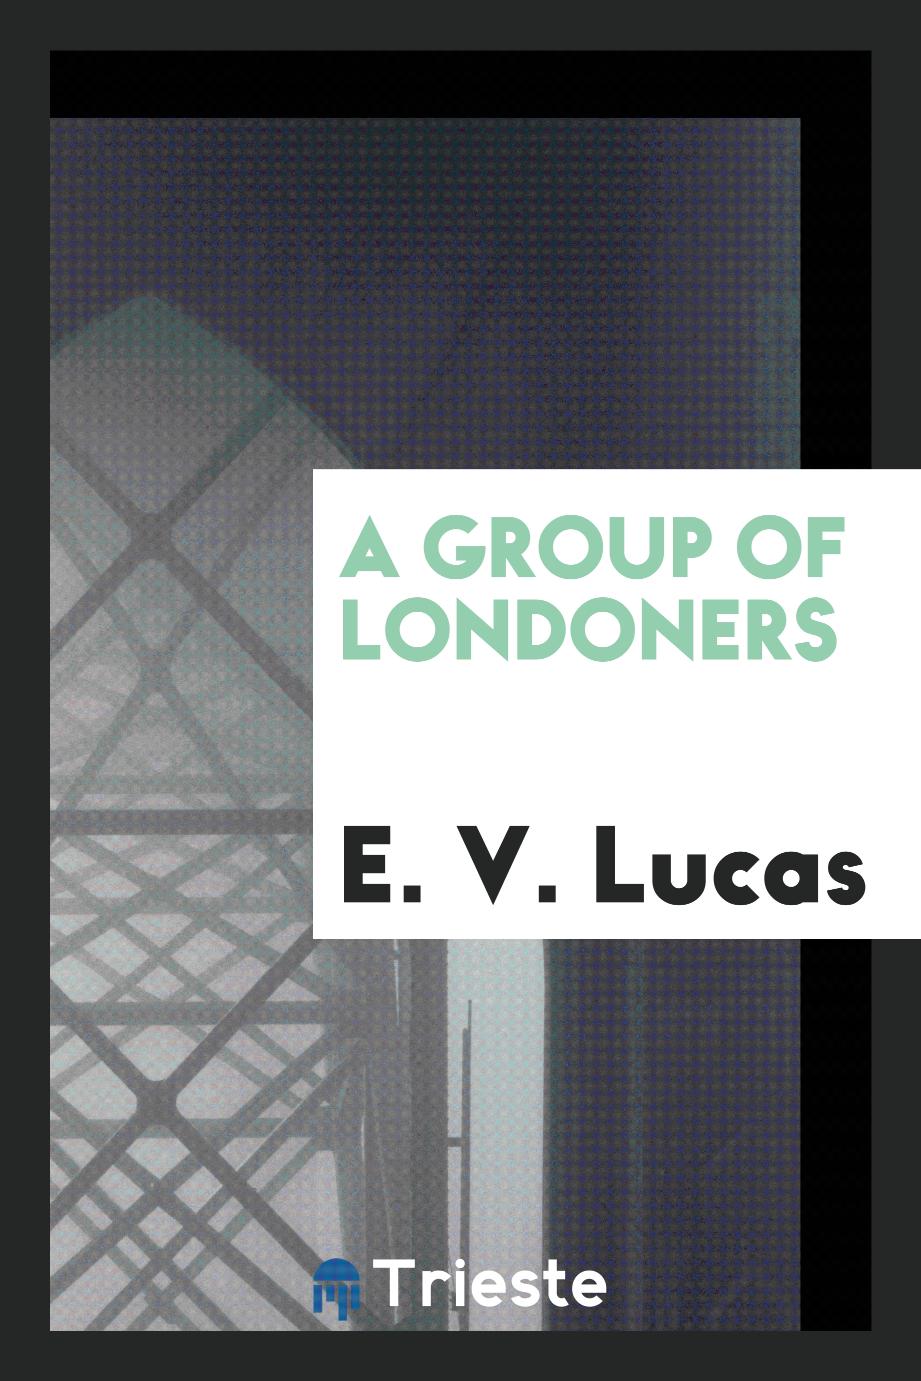 A group of Londoners